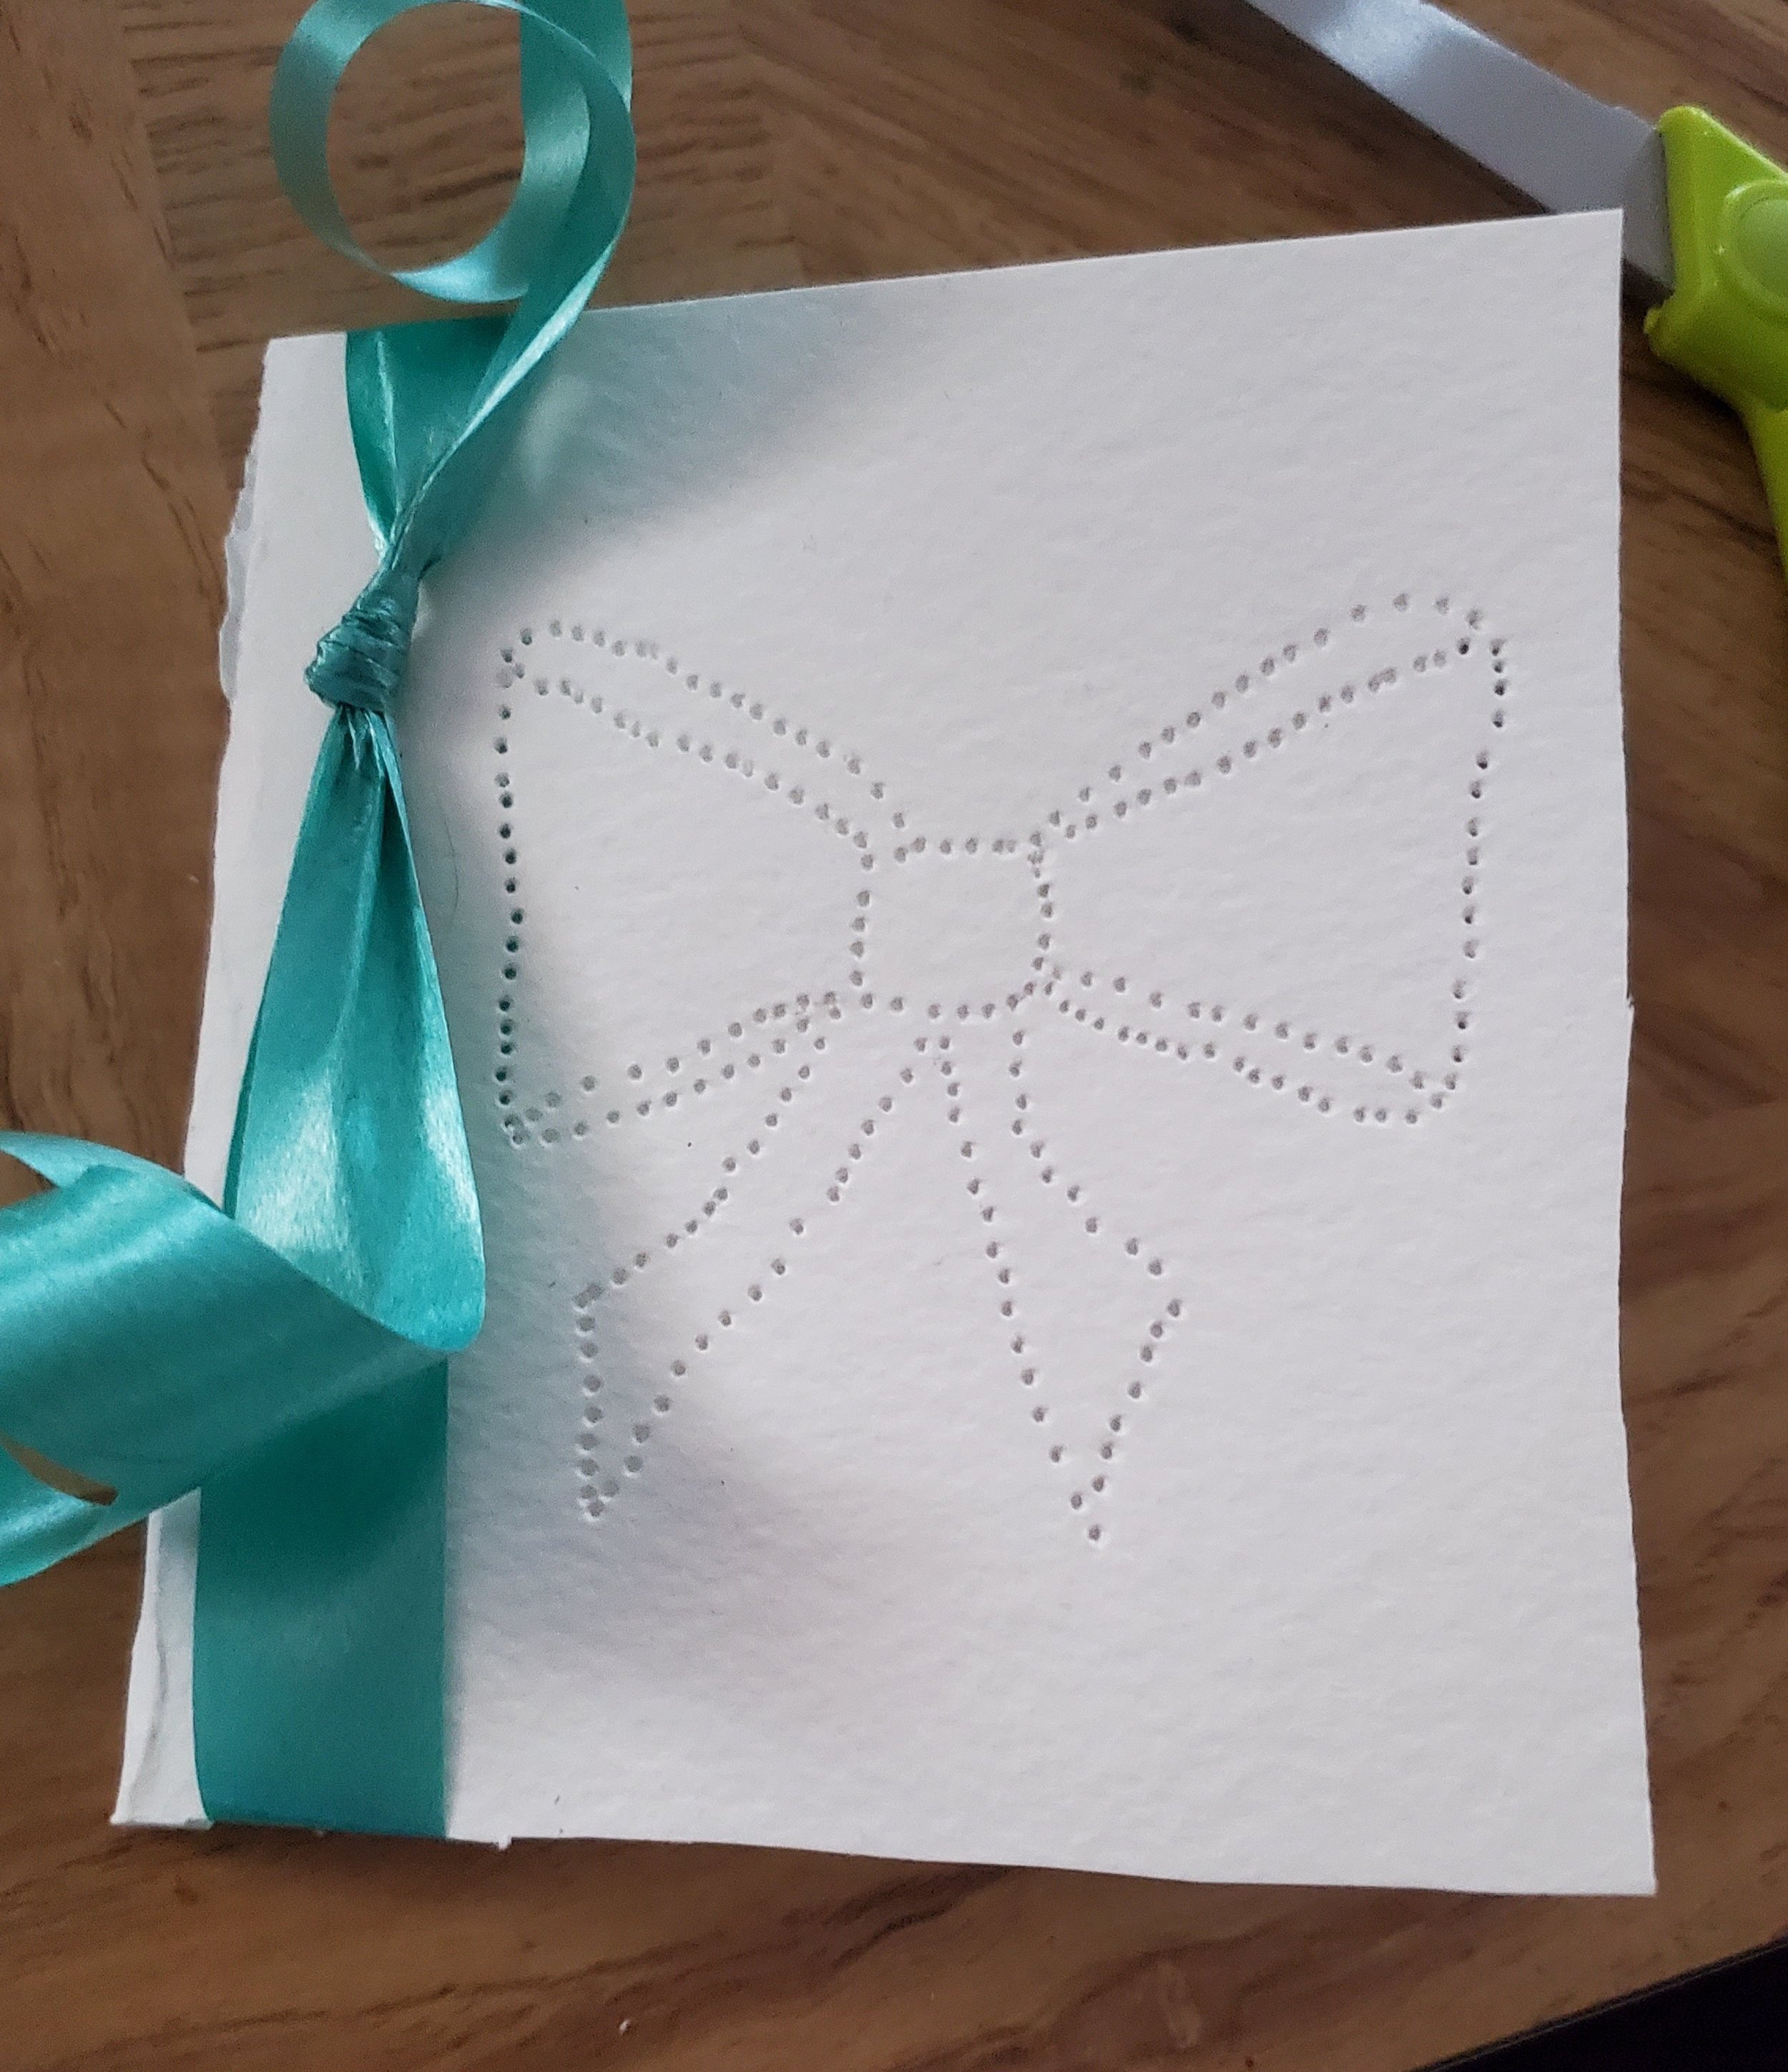  Take the ribbon and tie it around the face of the card, close to the fold. 